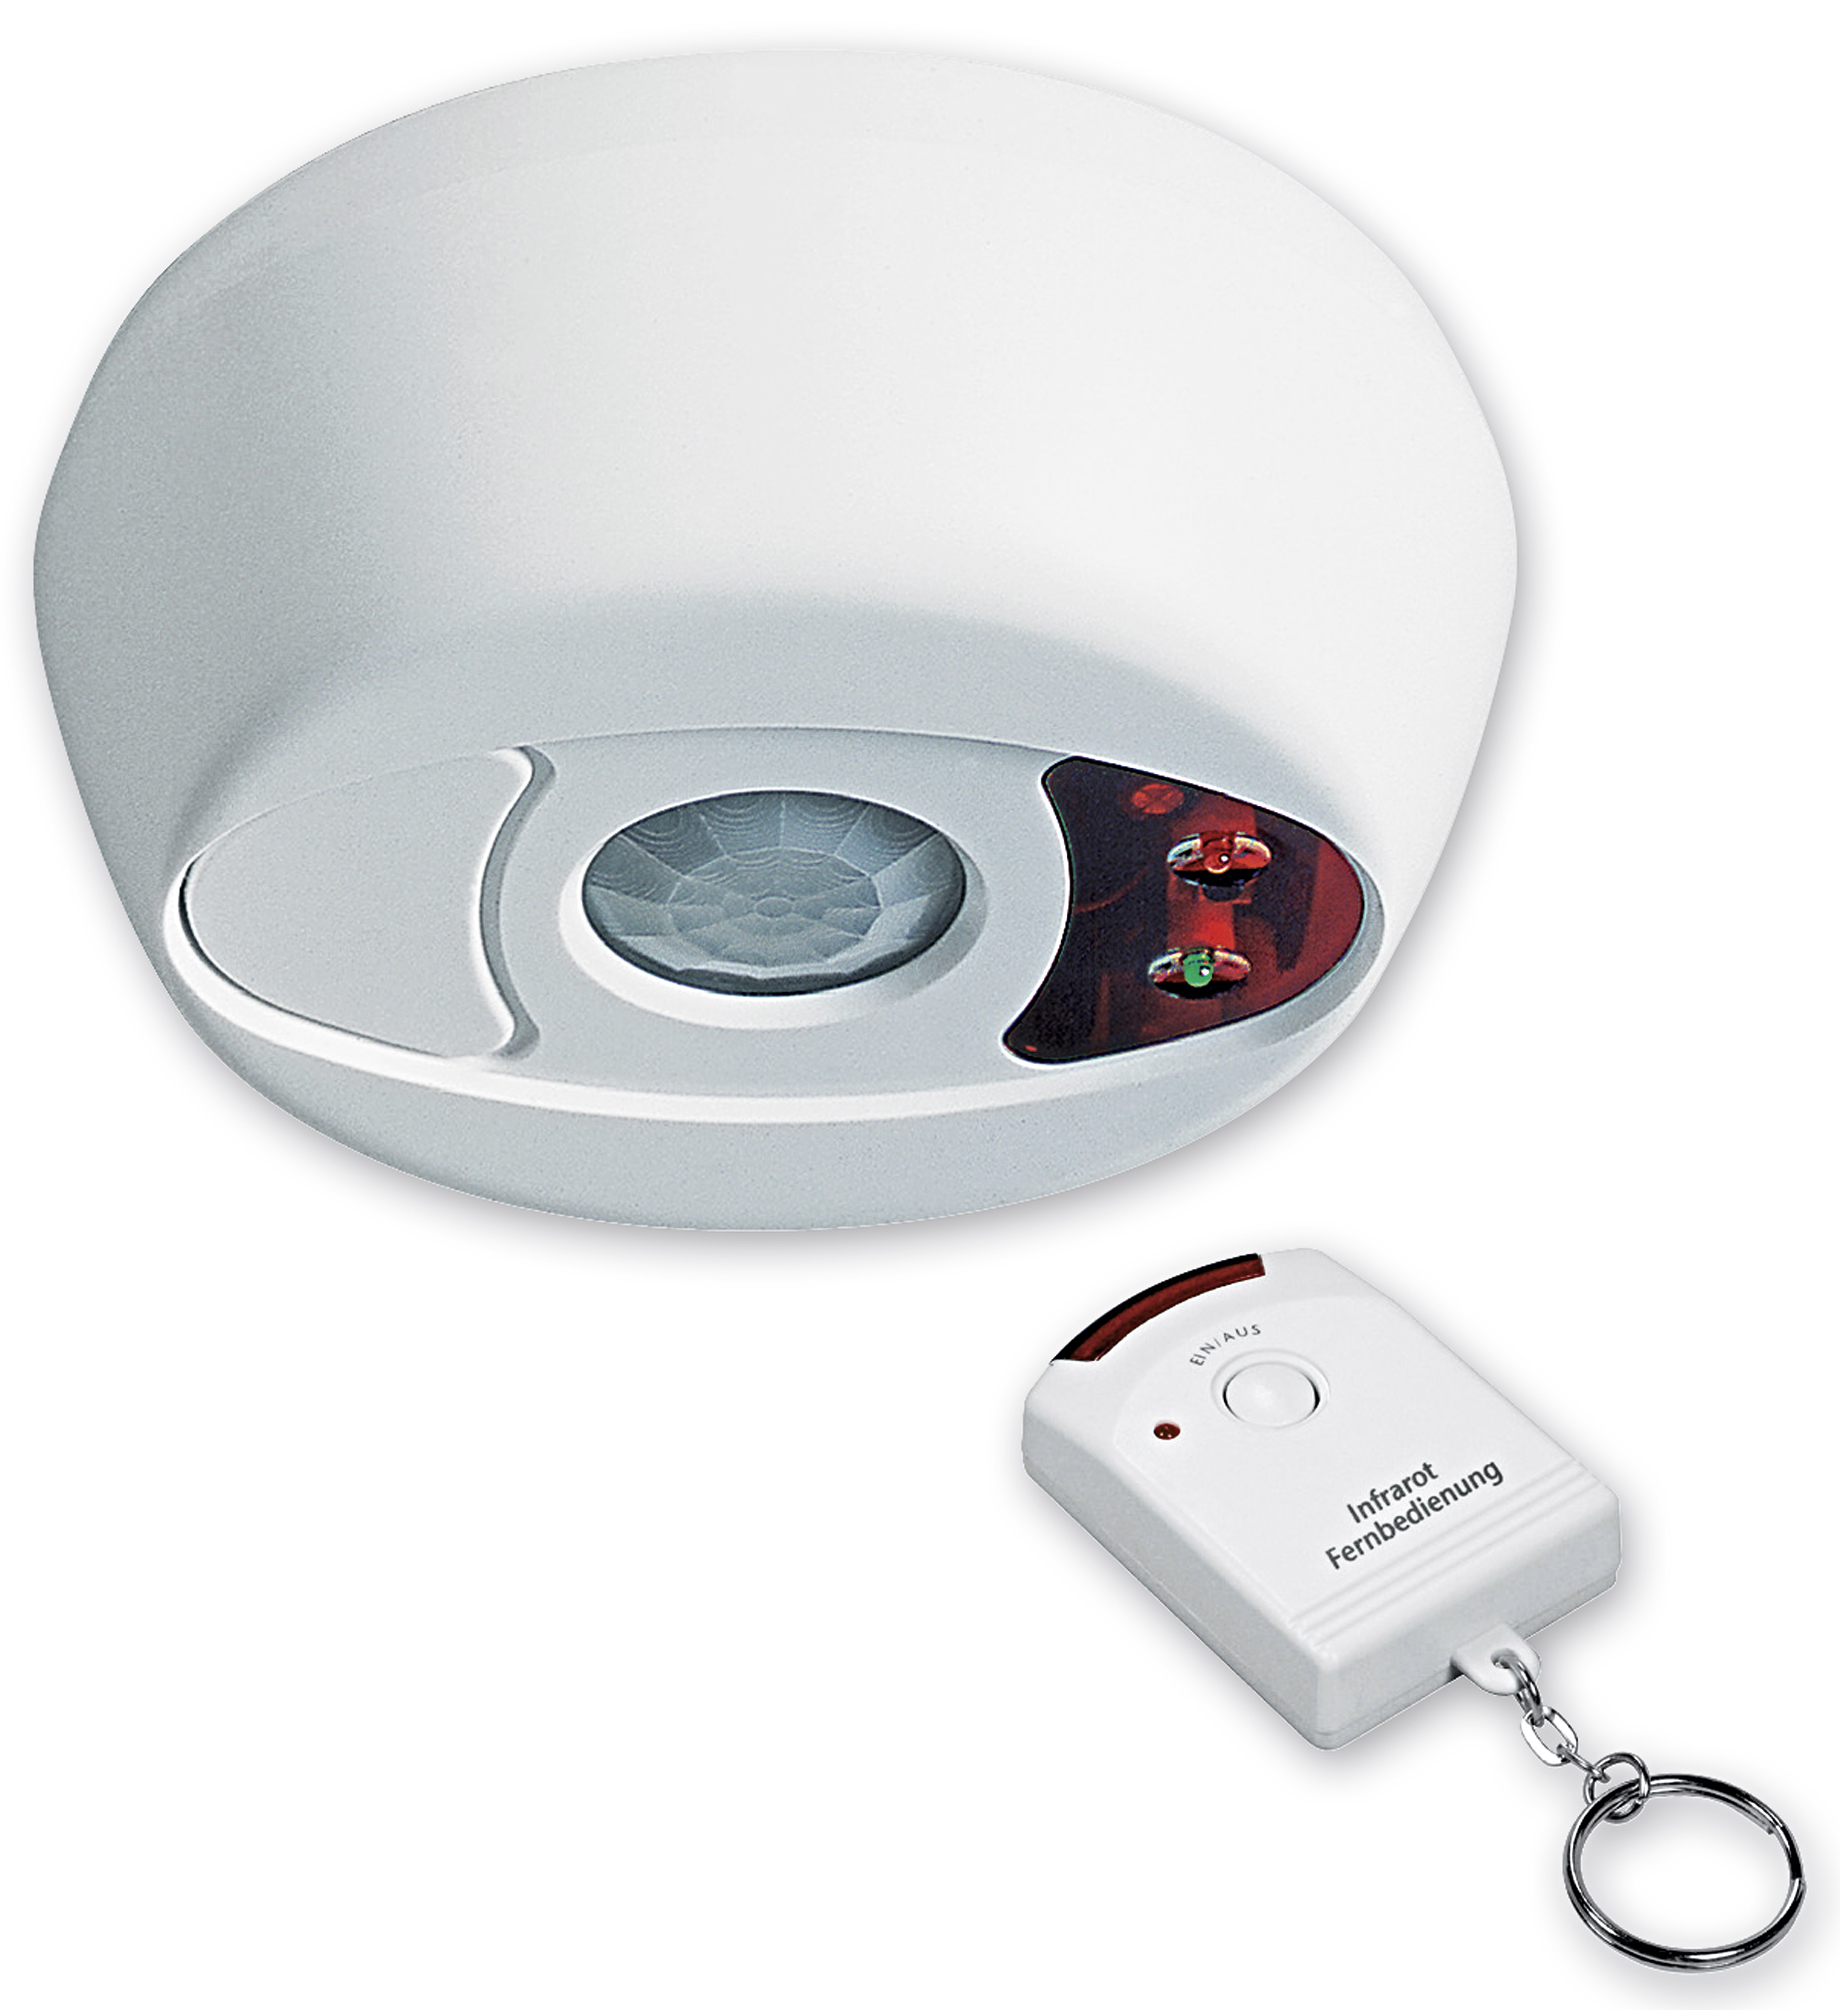 Ceiling Alarm With Remote Control